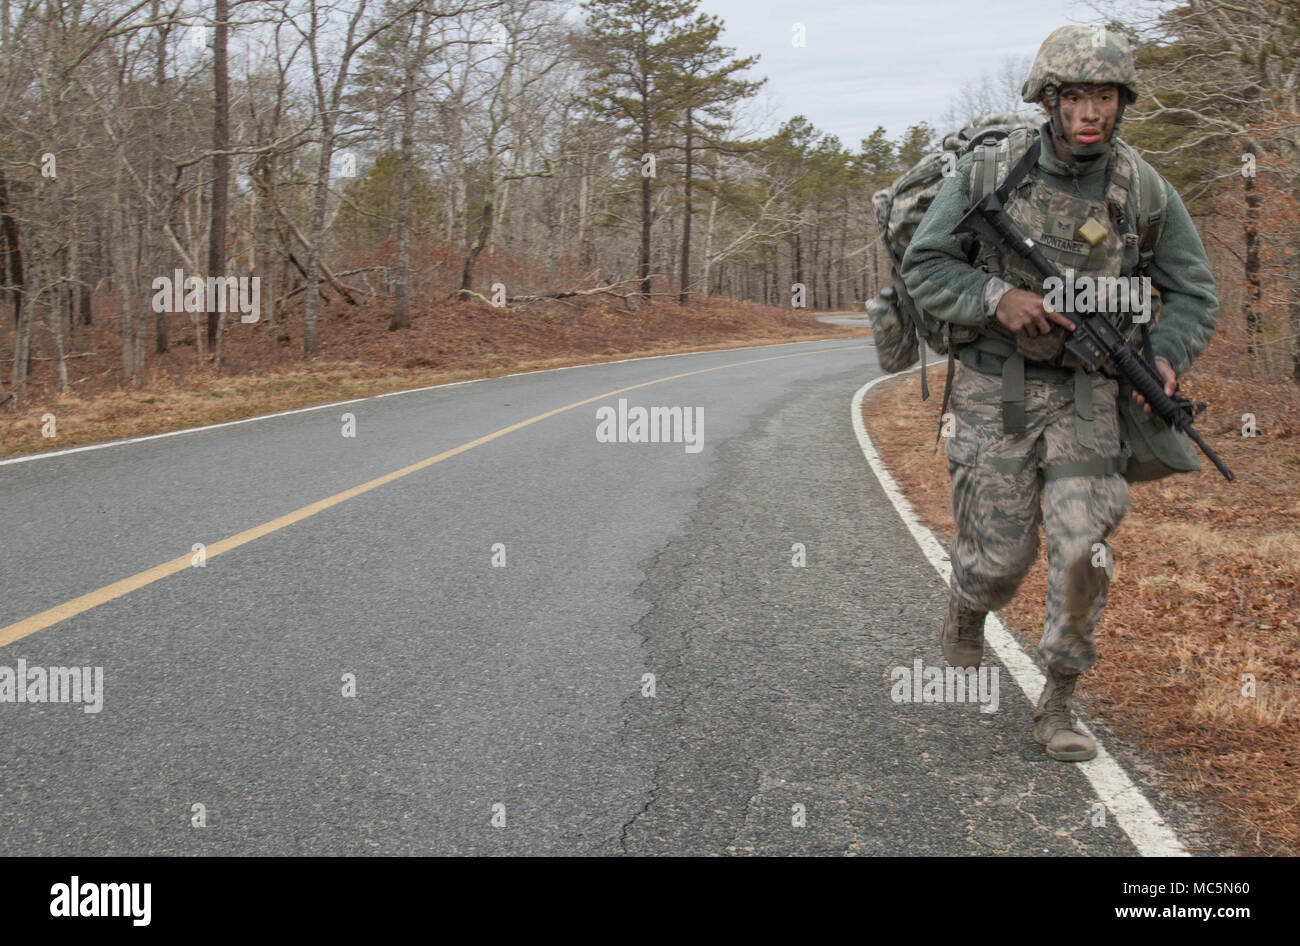 JOINT BASE CAPE COD, Mass. – Senior Airman David Montanez of the 104th Security Forces Squadron hustles in full battle rattle April 7, 2018 to the next station of the Massachusetts National Guard’s Best Warrior Competition here.  The annual event challenges some of the most qualified soldiers and airmen in the state to draw on their skills and grit to earn the title and a chance to move onto the national competition.  (Massachusetts Army National Guard photo by Spc. Samuel D. Keenan) Stock Photo